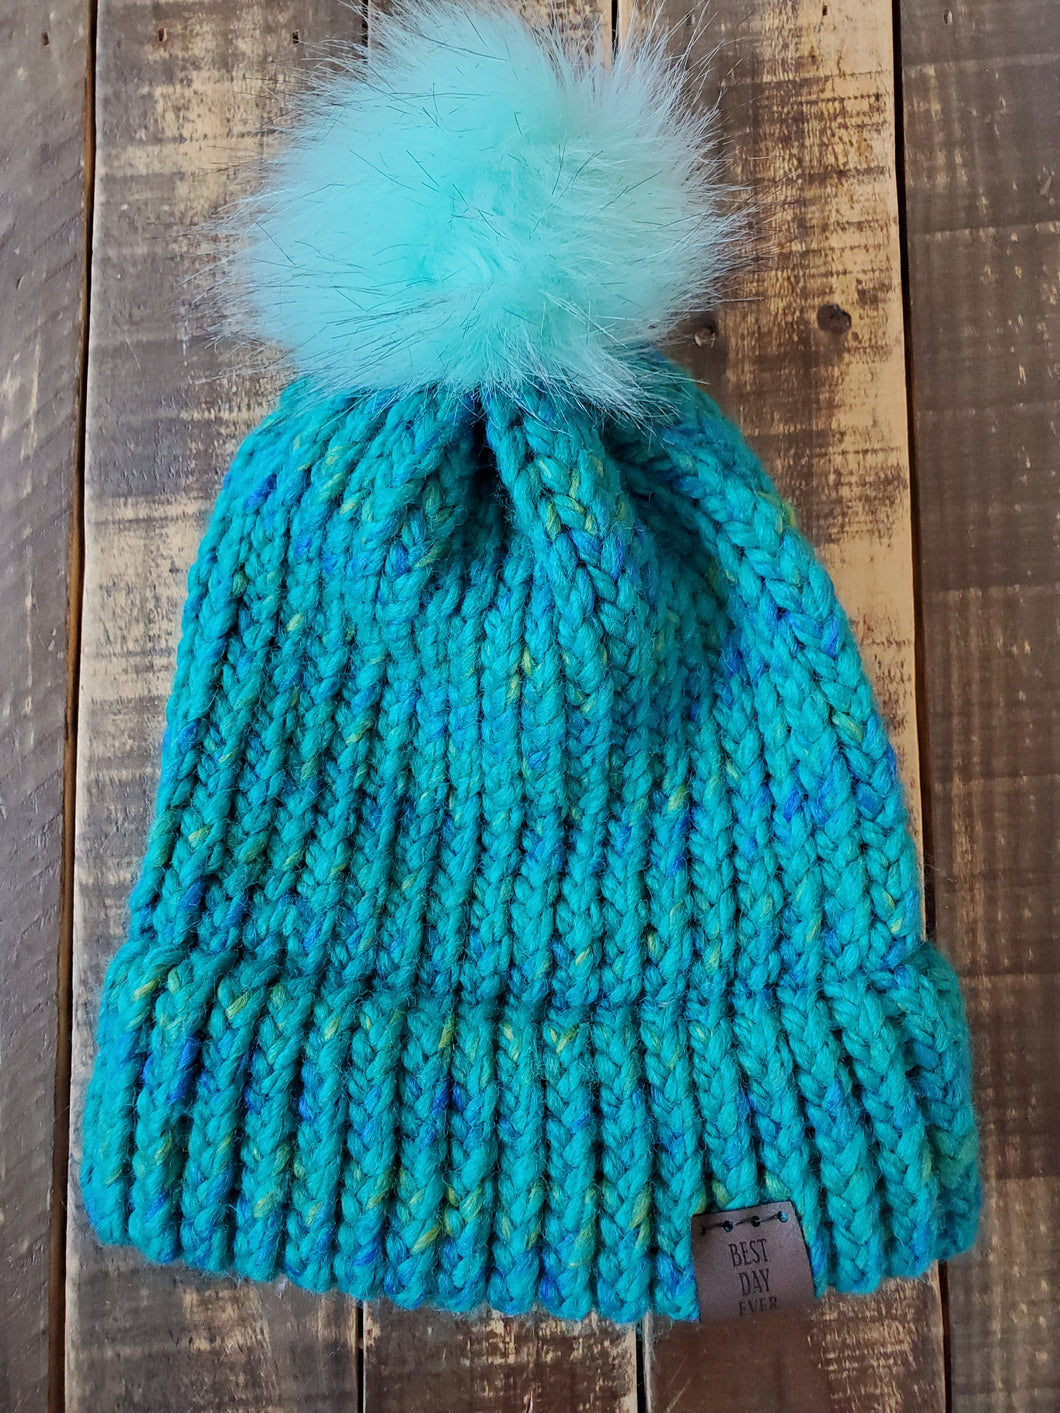 Multicolored Turquoise Hat with Turquoise Pom-Pom